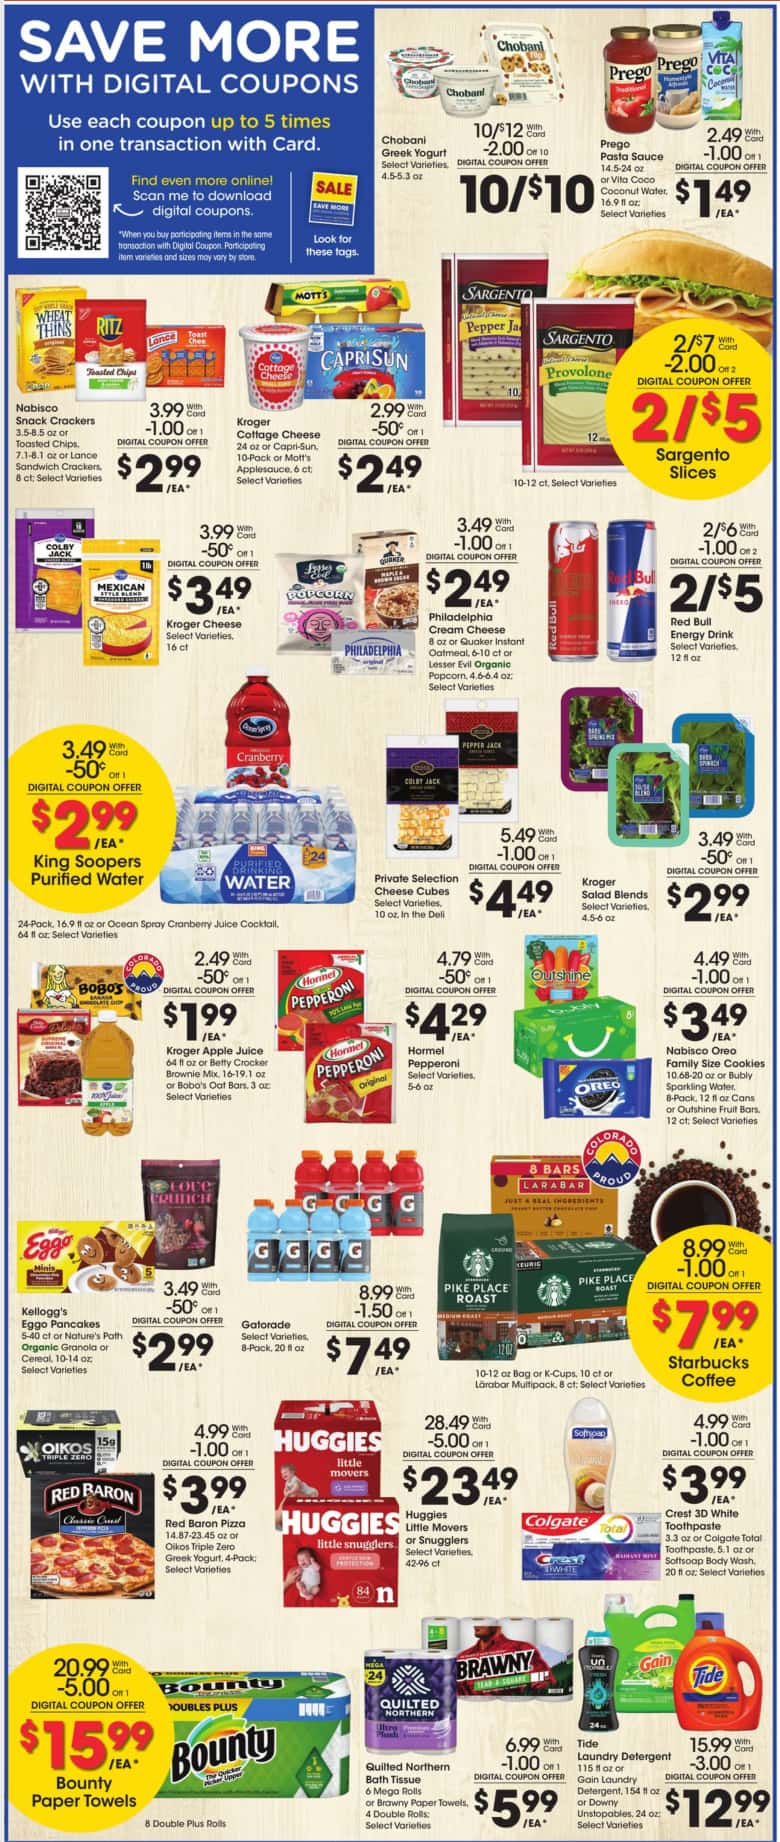 king soopers sales for this week March 27 - April 2, 2024